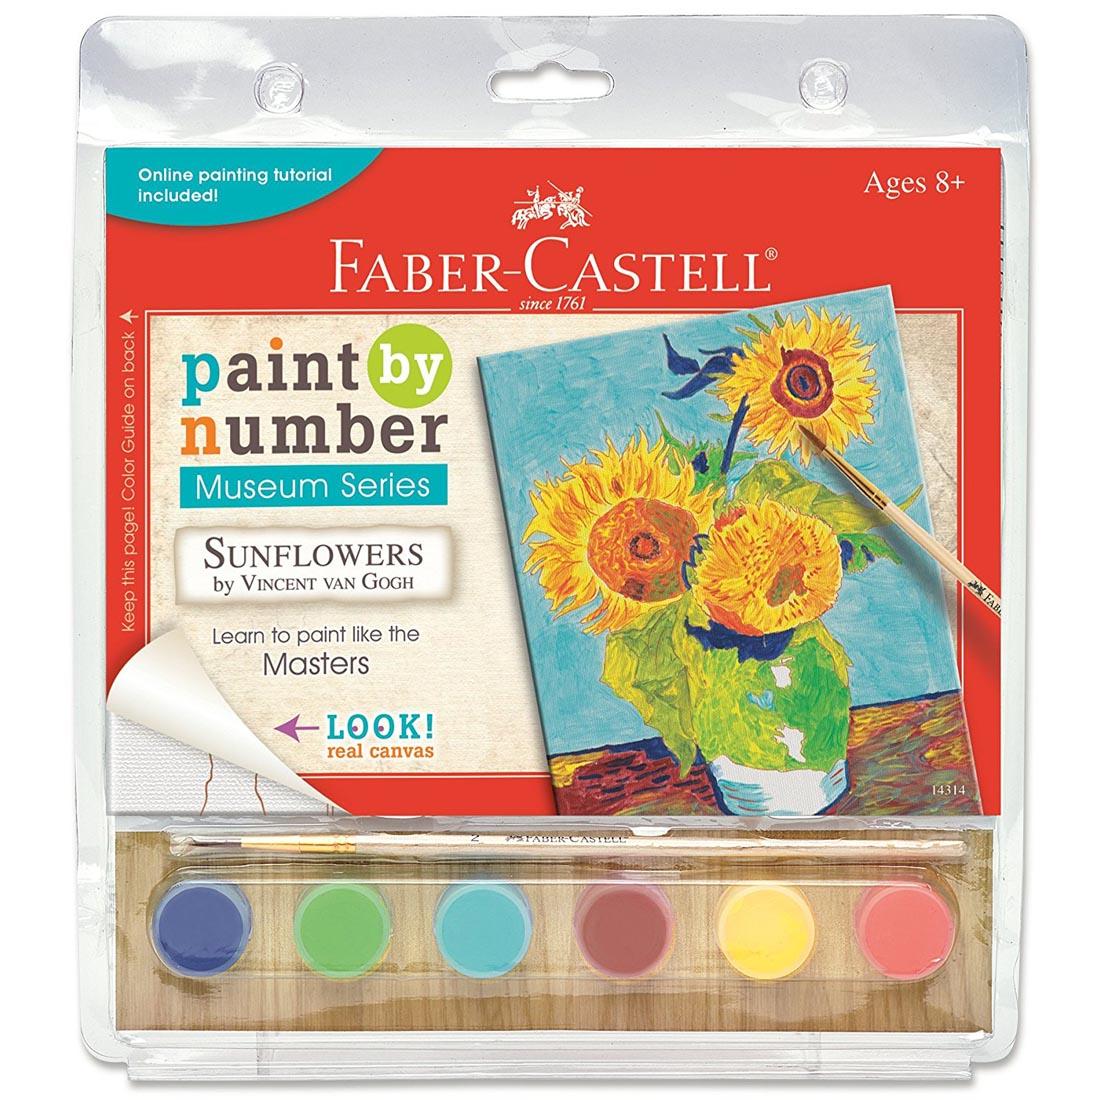 Faber-Castell Paint By Number Museum Series: Sunflowers